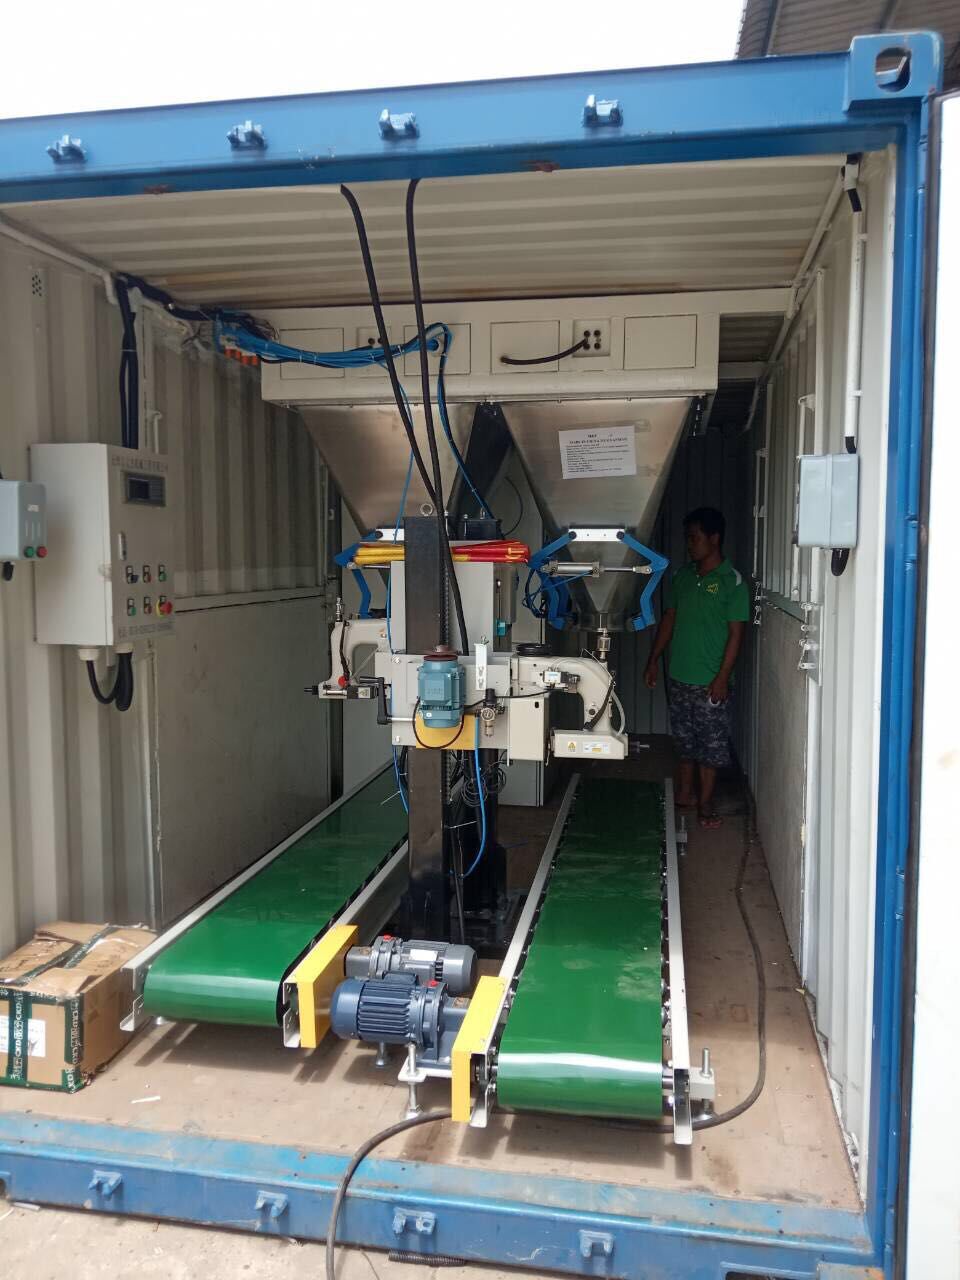 Containerised Bagging System, Mobile Containserized Bagging Unit,  Containerised Bagging System  Containerised Bagging System, Mobile Bagging Unit, Mobile Containserized Bagging Unit, Movable bagging 